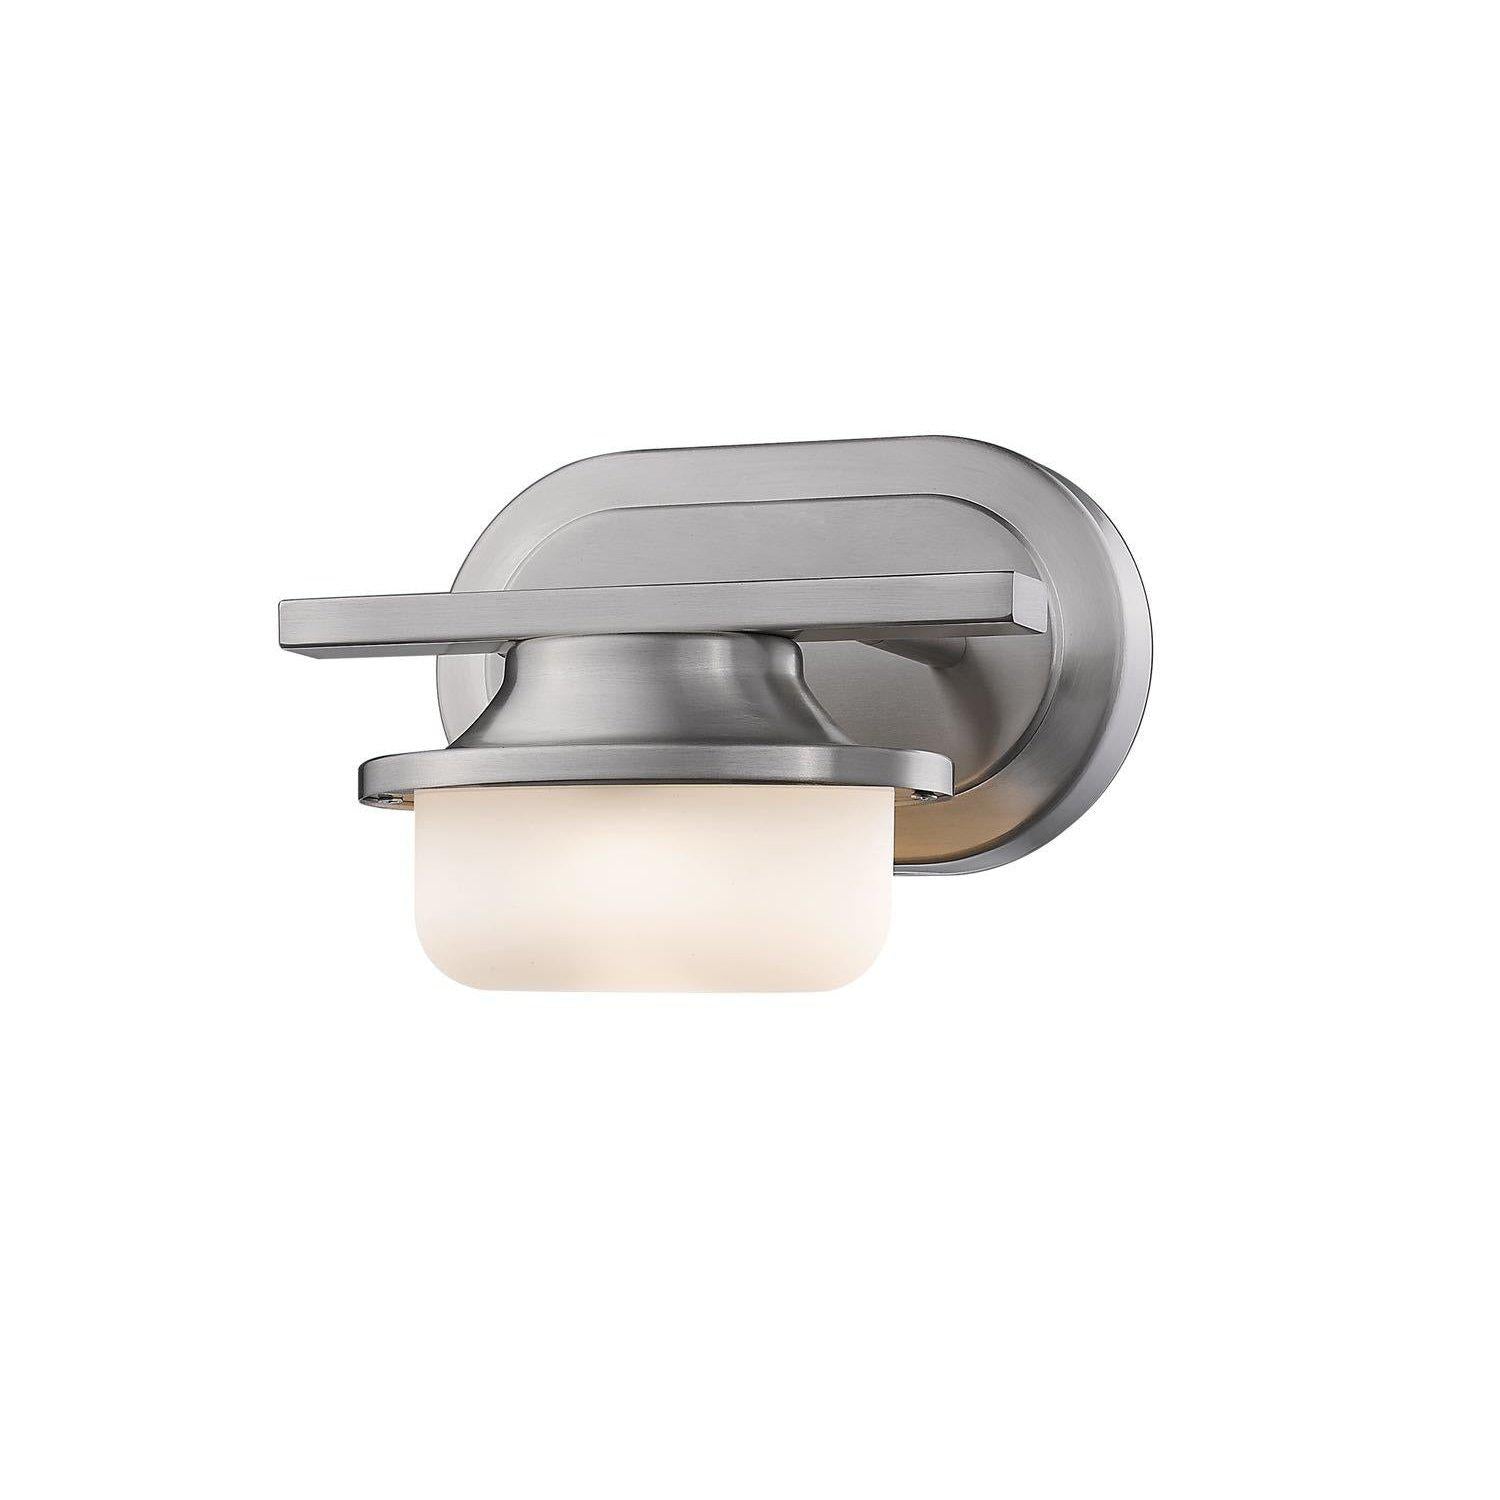 Optum Wall Sconce Brushed Nickel